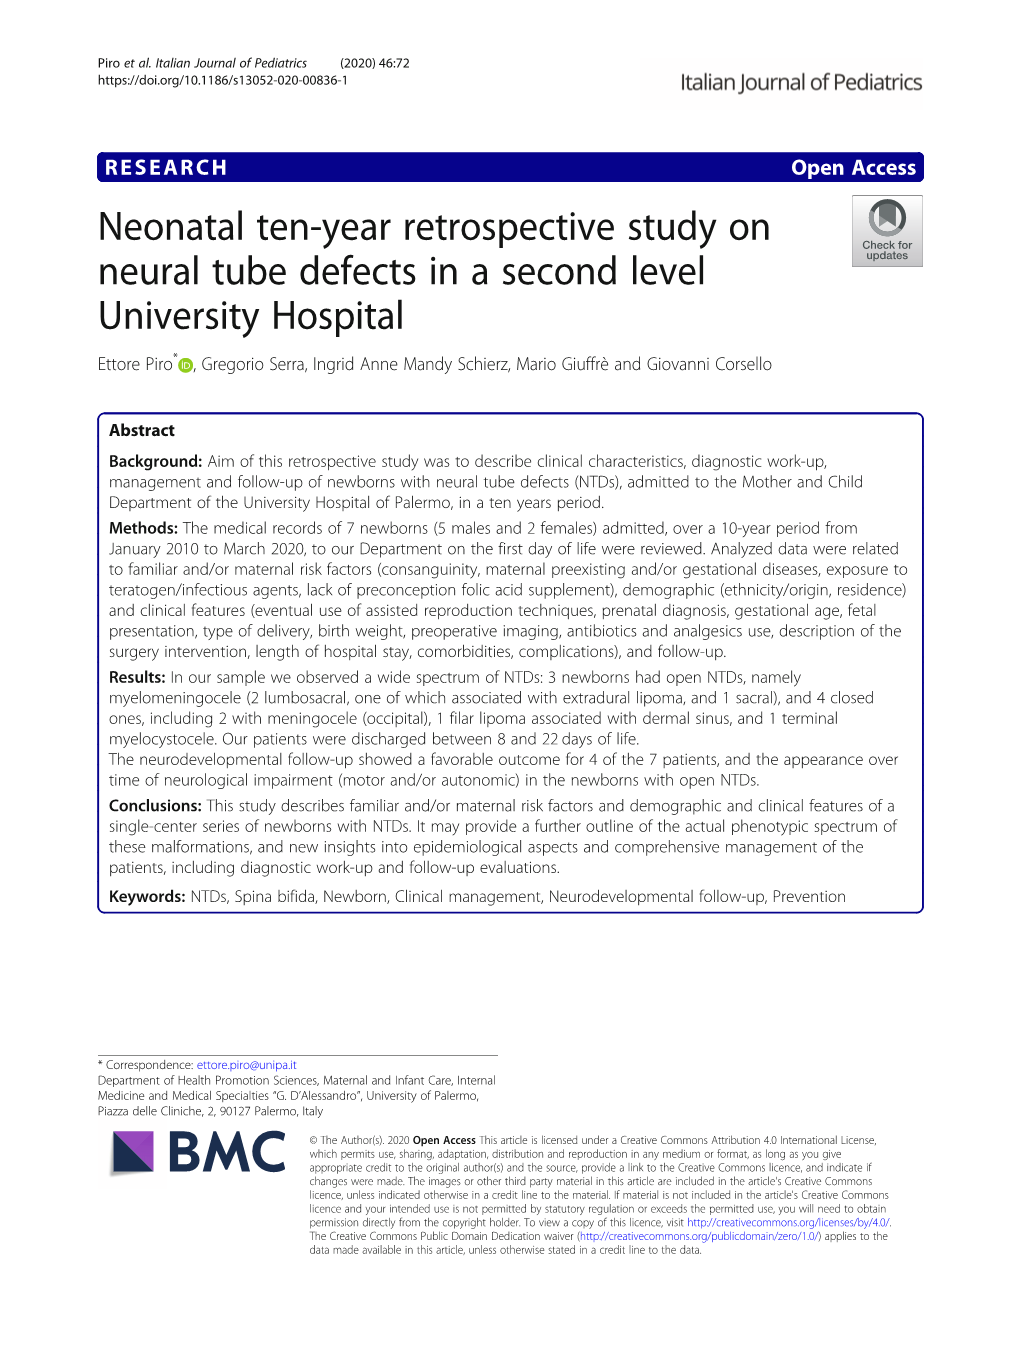 Neonatal Ten-Year Retrospective Study on Neural Tube Defects in a Second